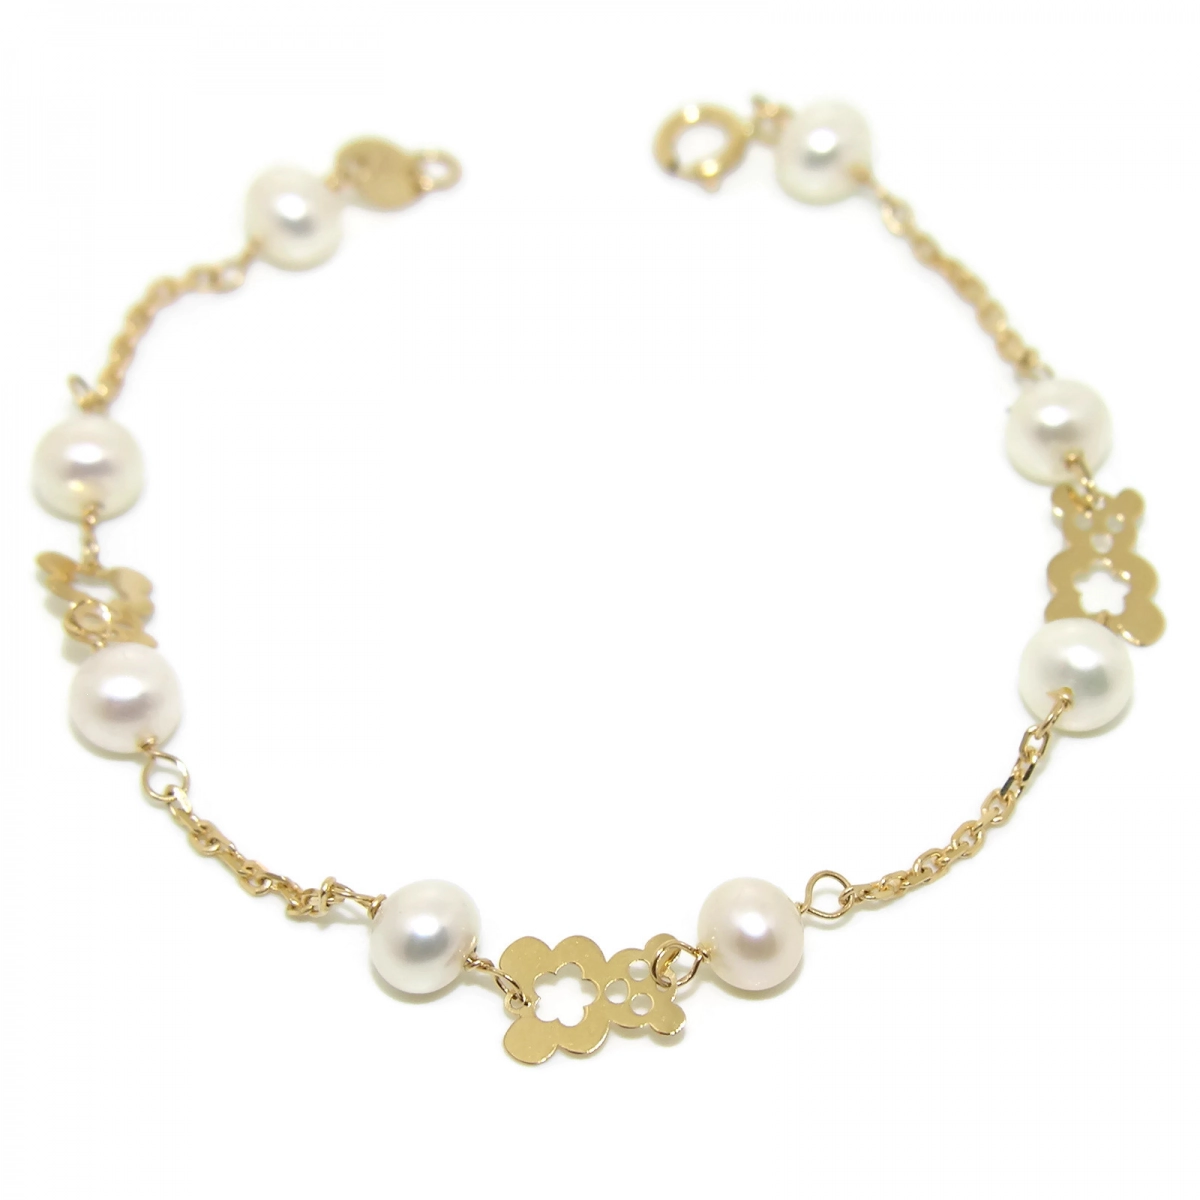 BRACELET FOR COMMUNION YELLOW GOLD 18KTES WITH 8 CULTURED PEARLS OF 5MM NEVER SAY NEVER